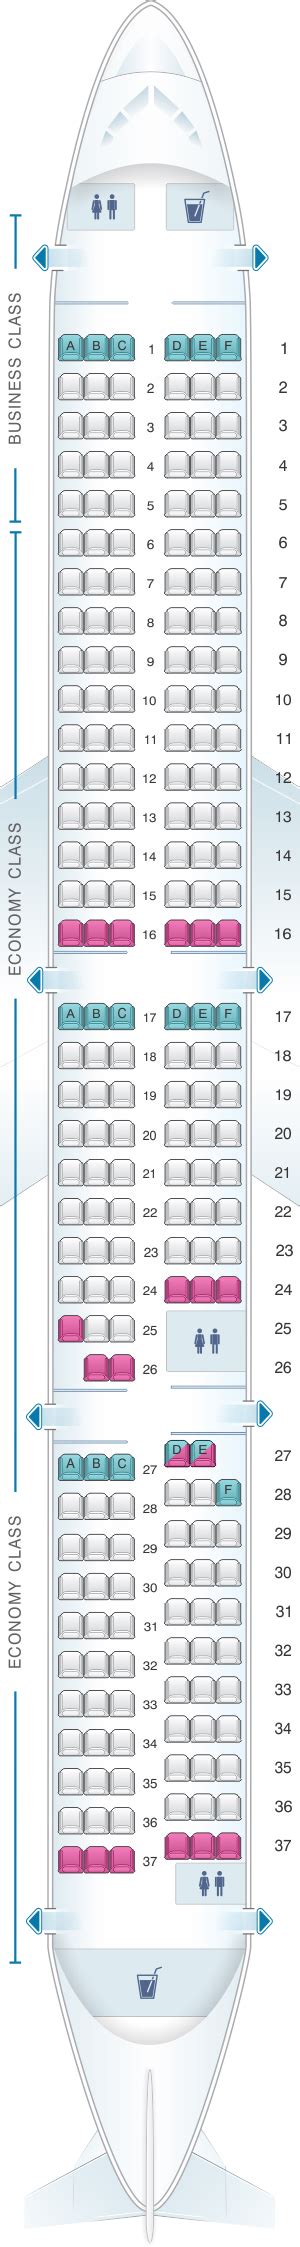 Airbus a321 neo seats. On the state-of-the-art Airbus A321-200neo, the newest addition to the A321-200neo family, United's economy class stands out. Designed for 123 passengers, it boasts modern amenities, comfortable seating, and an advanced entertainment system. 